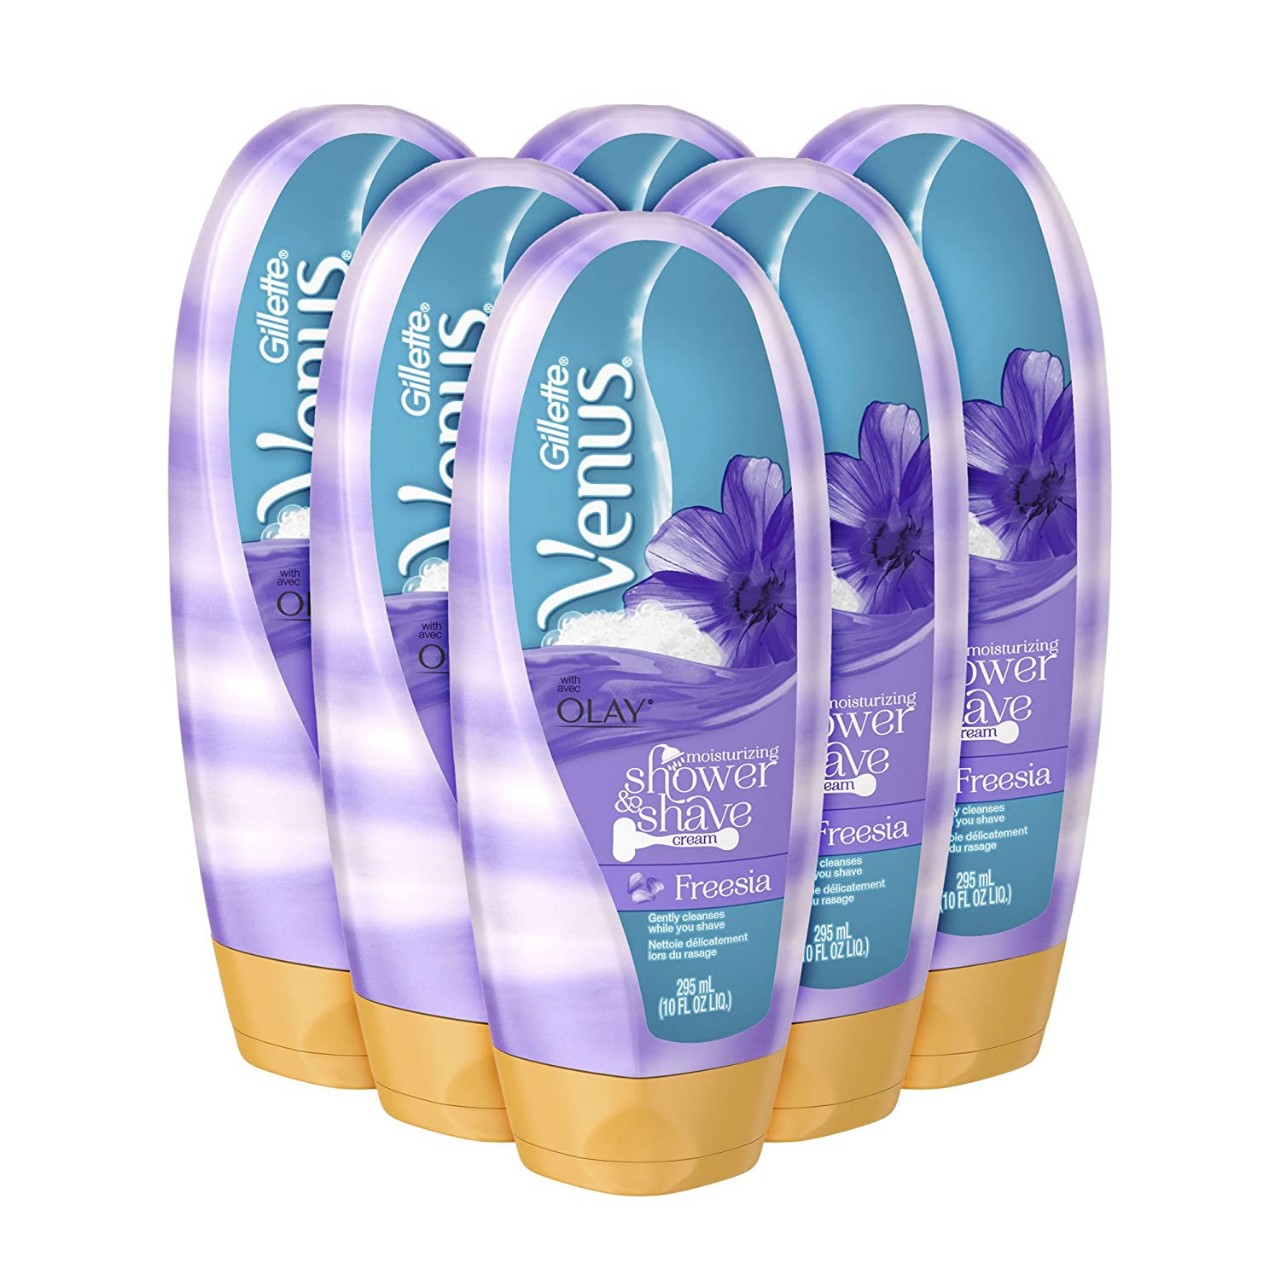 Gillette Venus with Olay Shower & Moisturizing Shave Cream, Freesia, 10 Ounce, Pack of 6